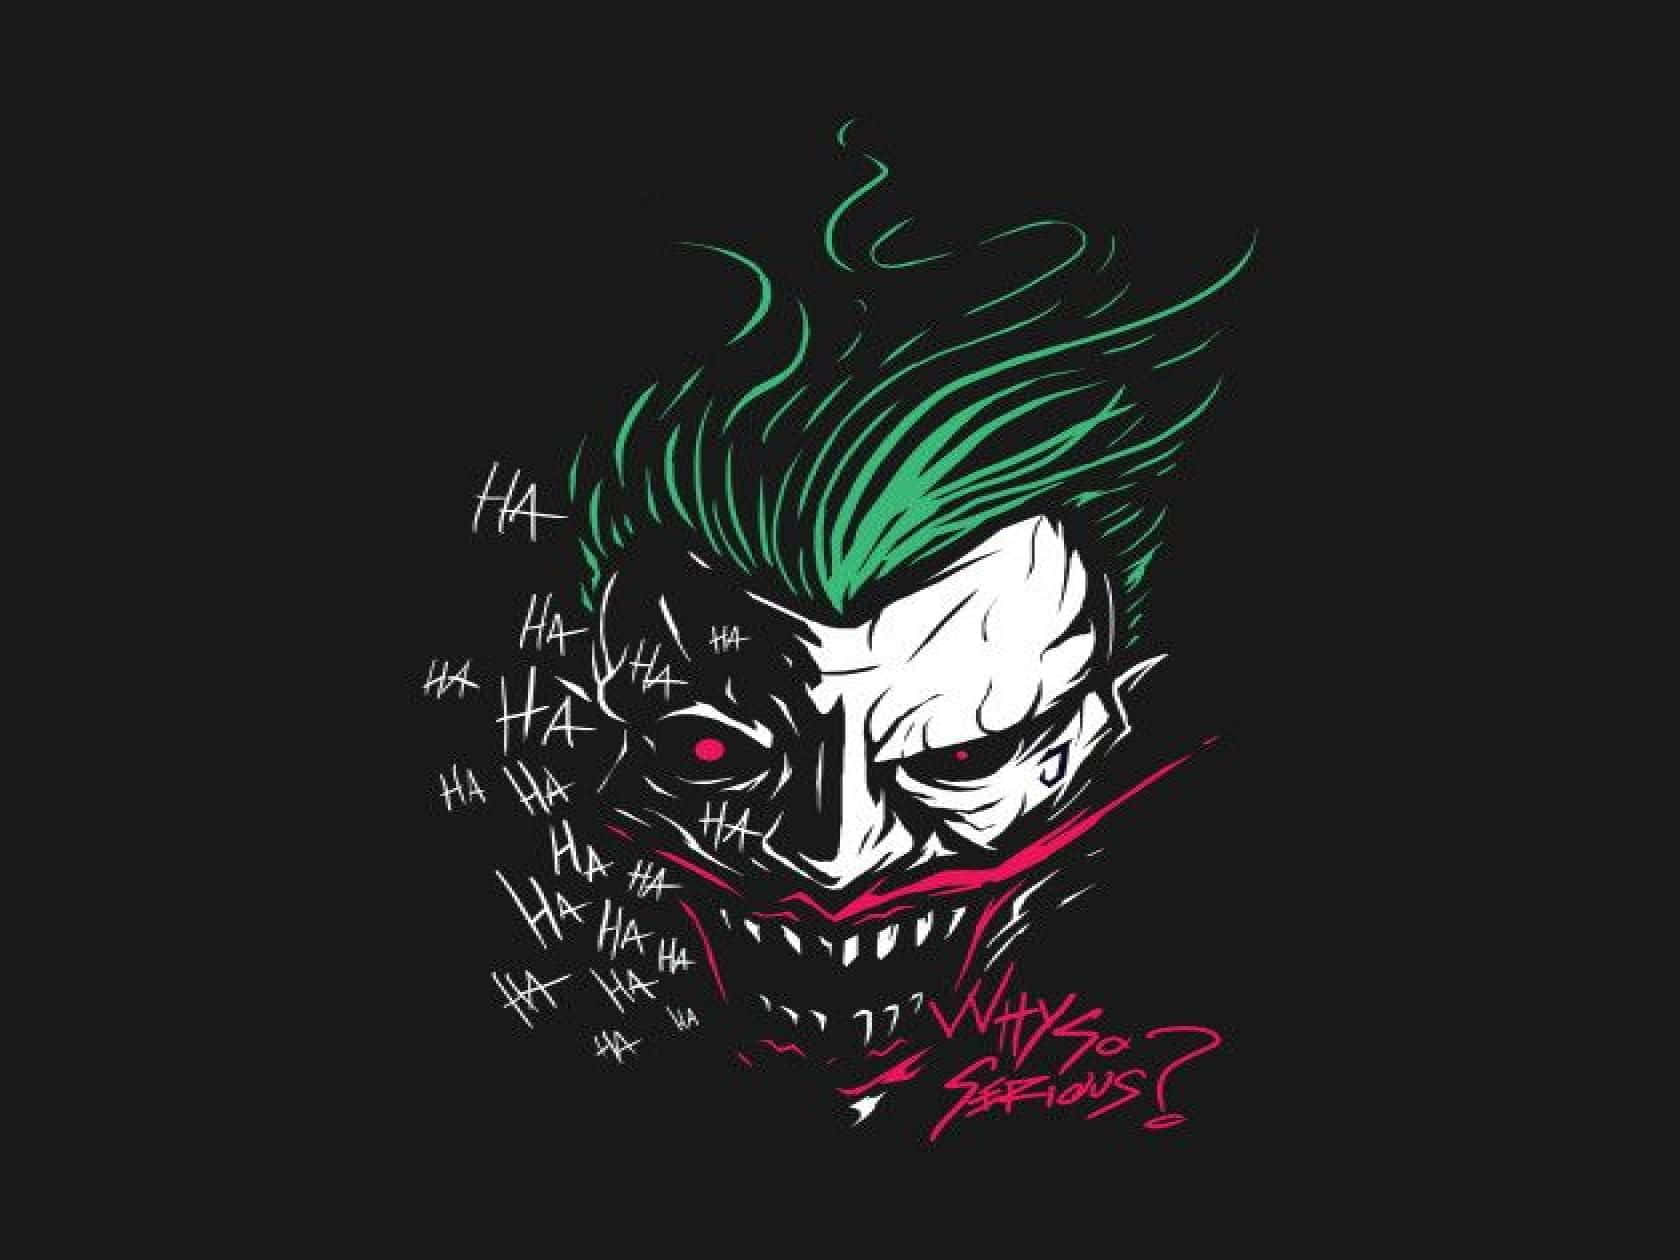 Maniacal Laughter Of The Iconic Joker Wallpaper